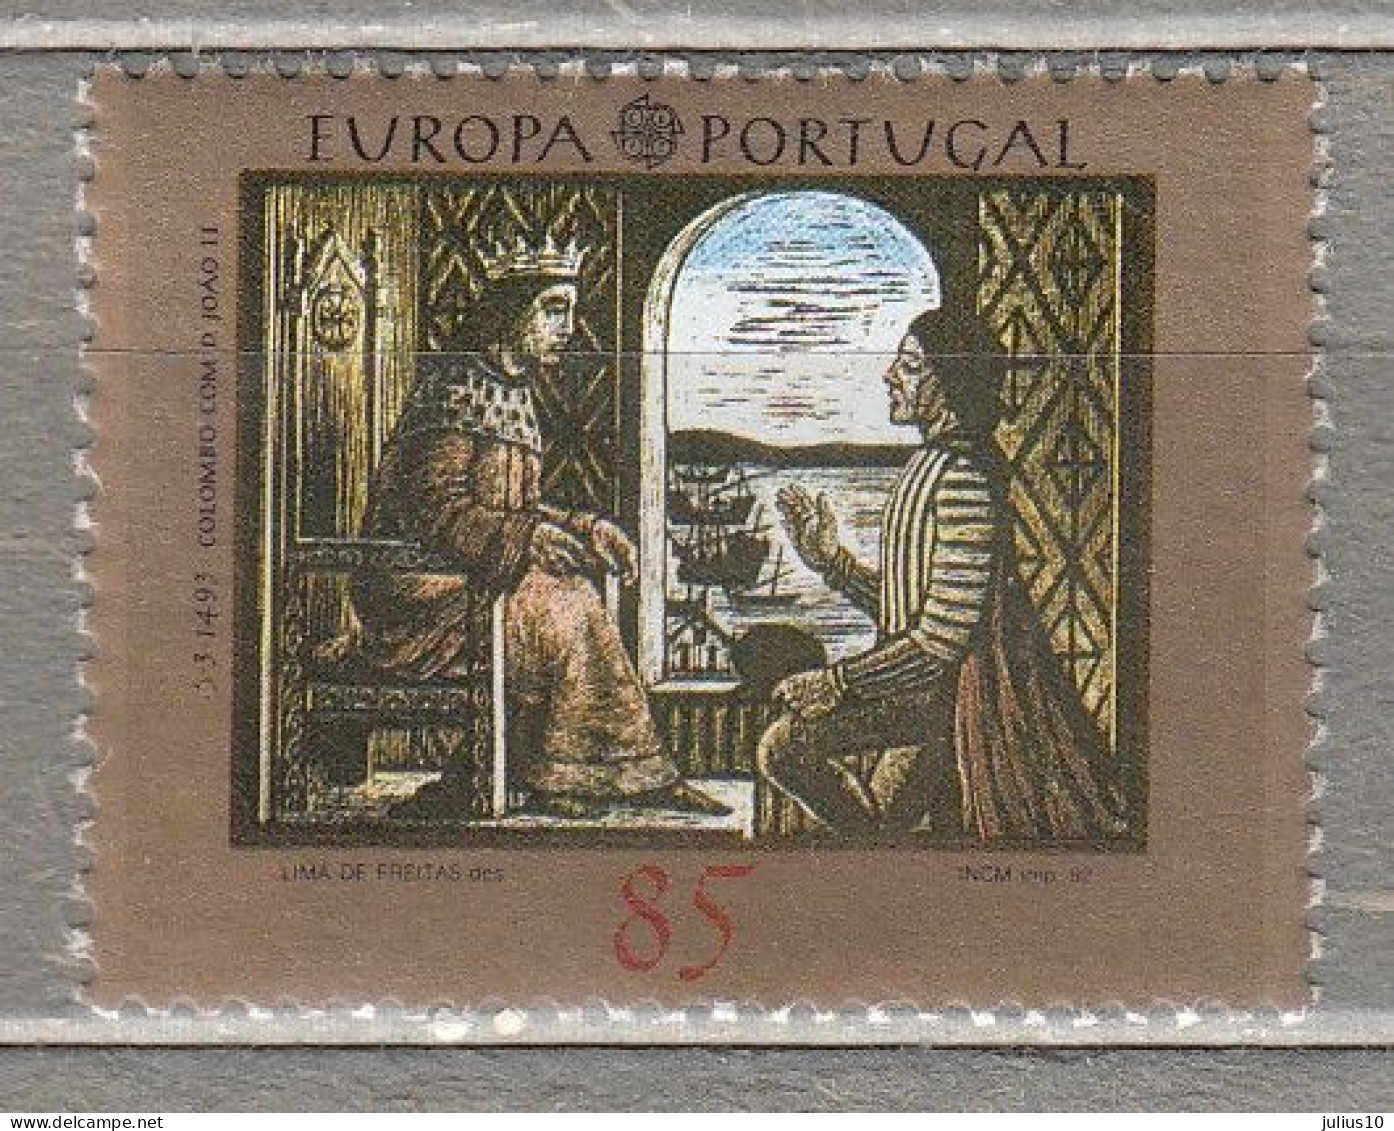 EUROPA CEPT 1992 Portugal C.Colombo 500th Discovery Of America MNH(**) Mi 1927 #33914 - 1992